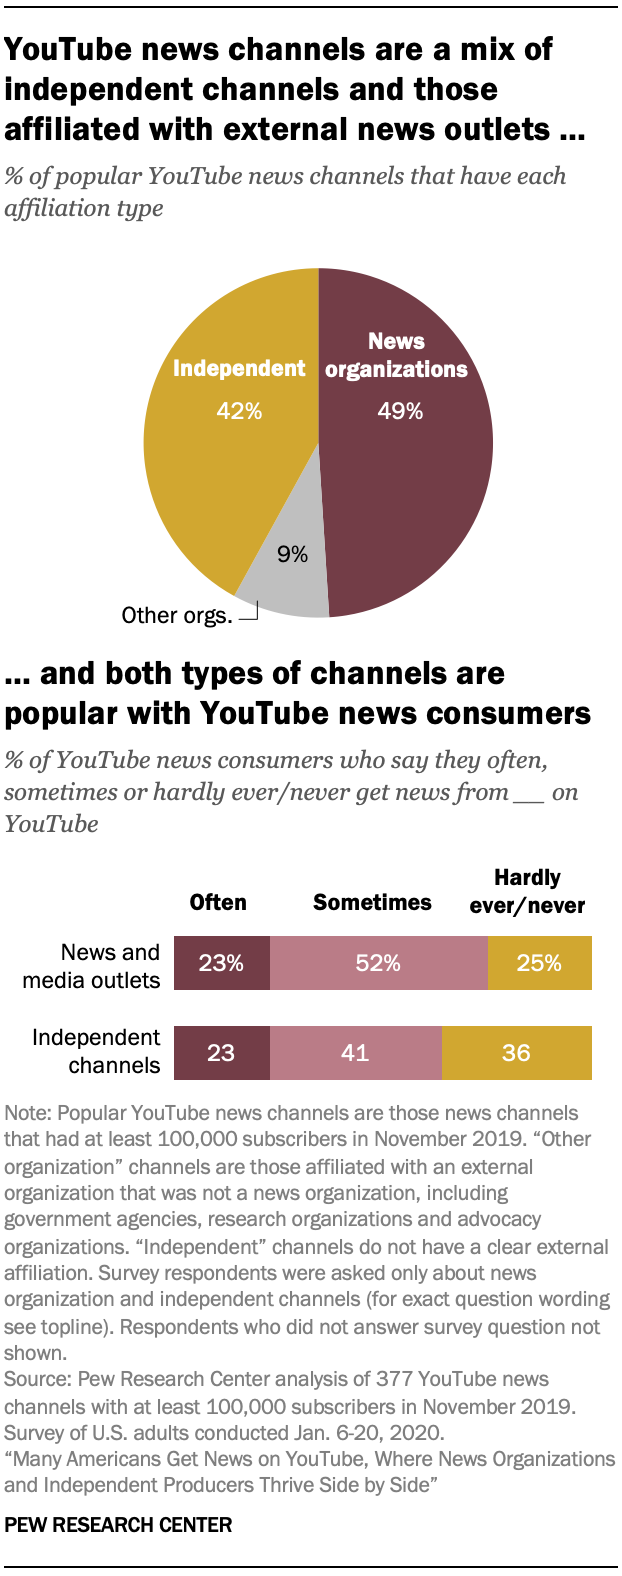 YouTube news channels are a mix of independent channels and those affiliated with external news outlets … and both types of channels are popular with YouTube news consumers 